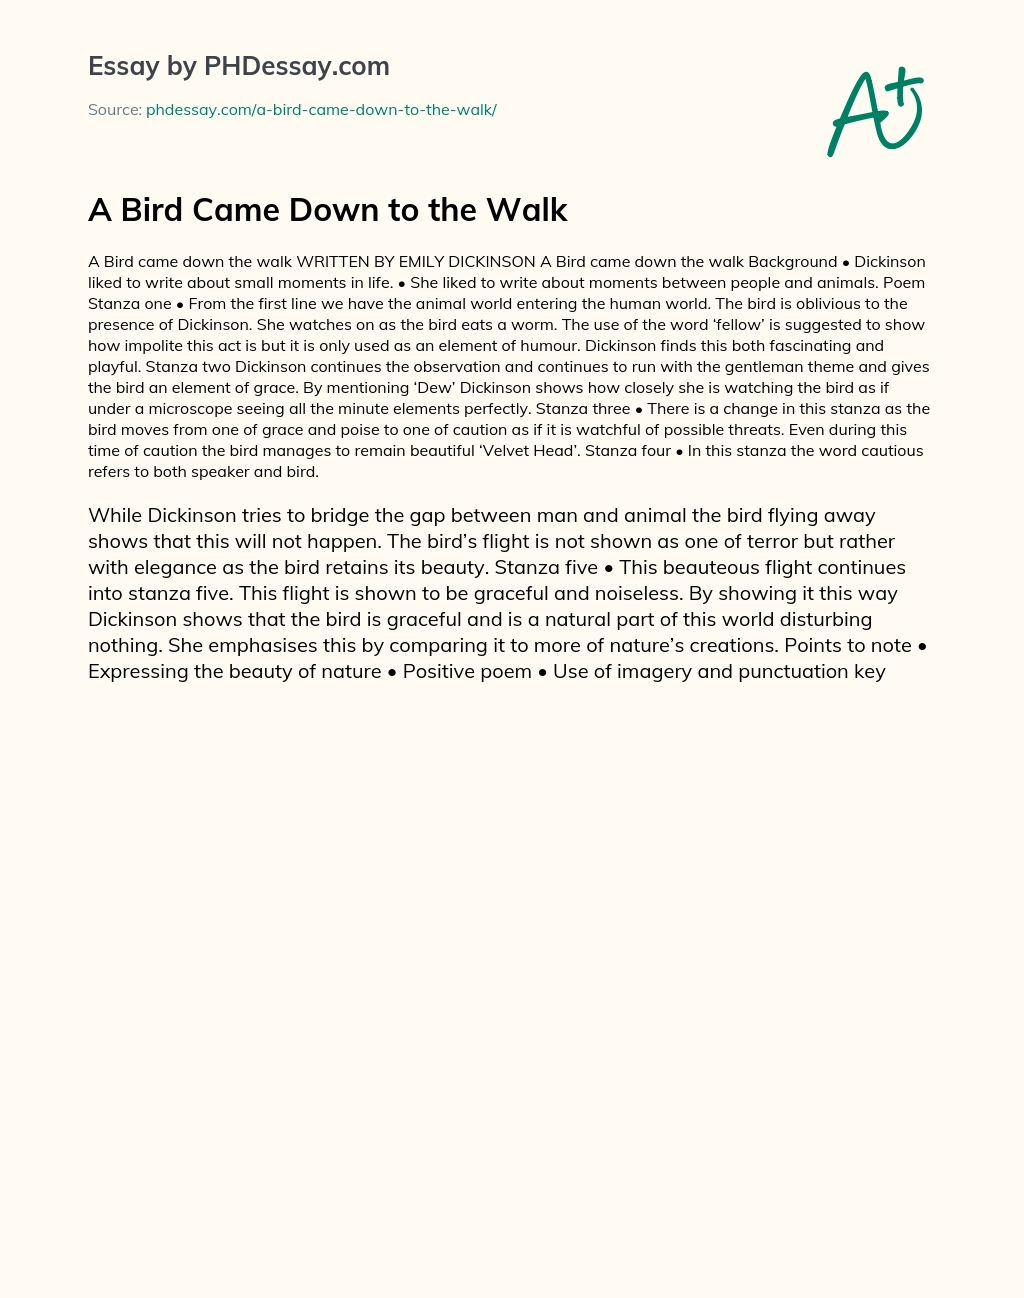 A Bird Came Down to the Walk essay